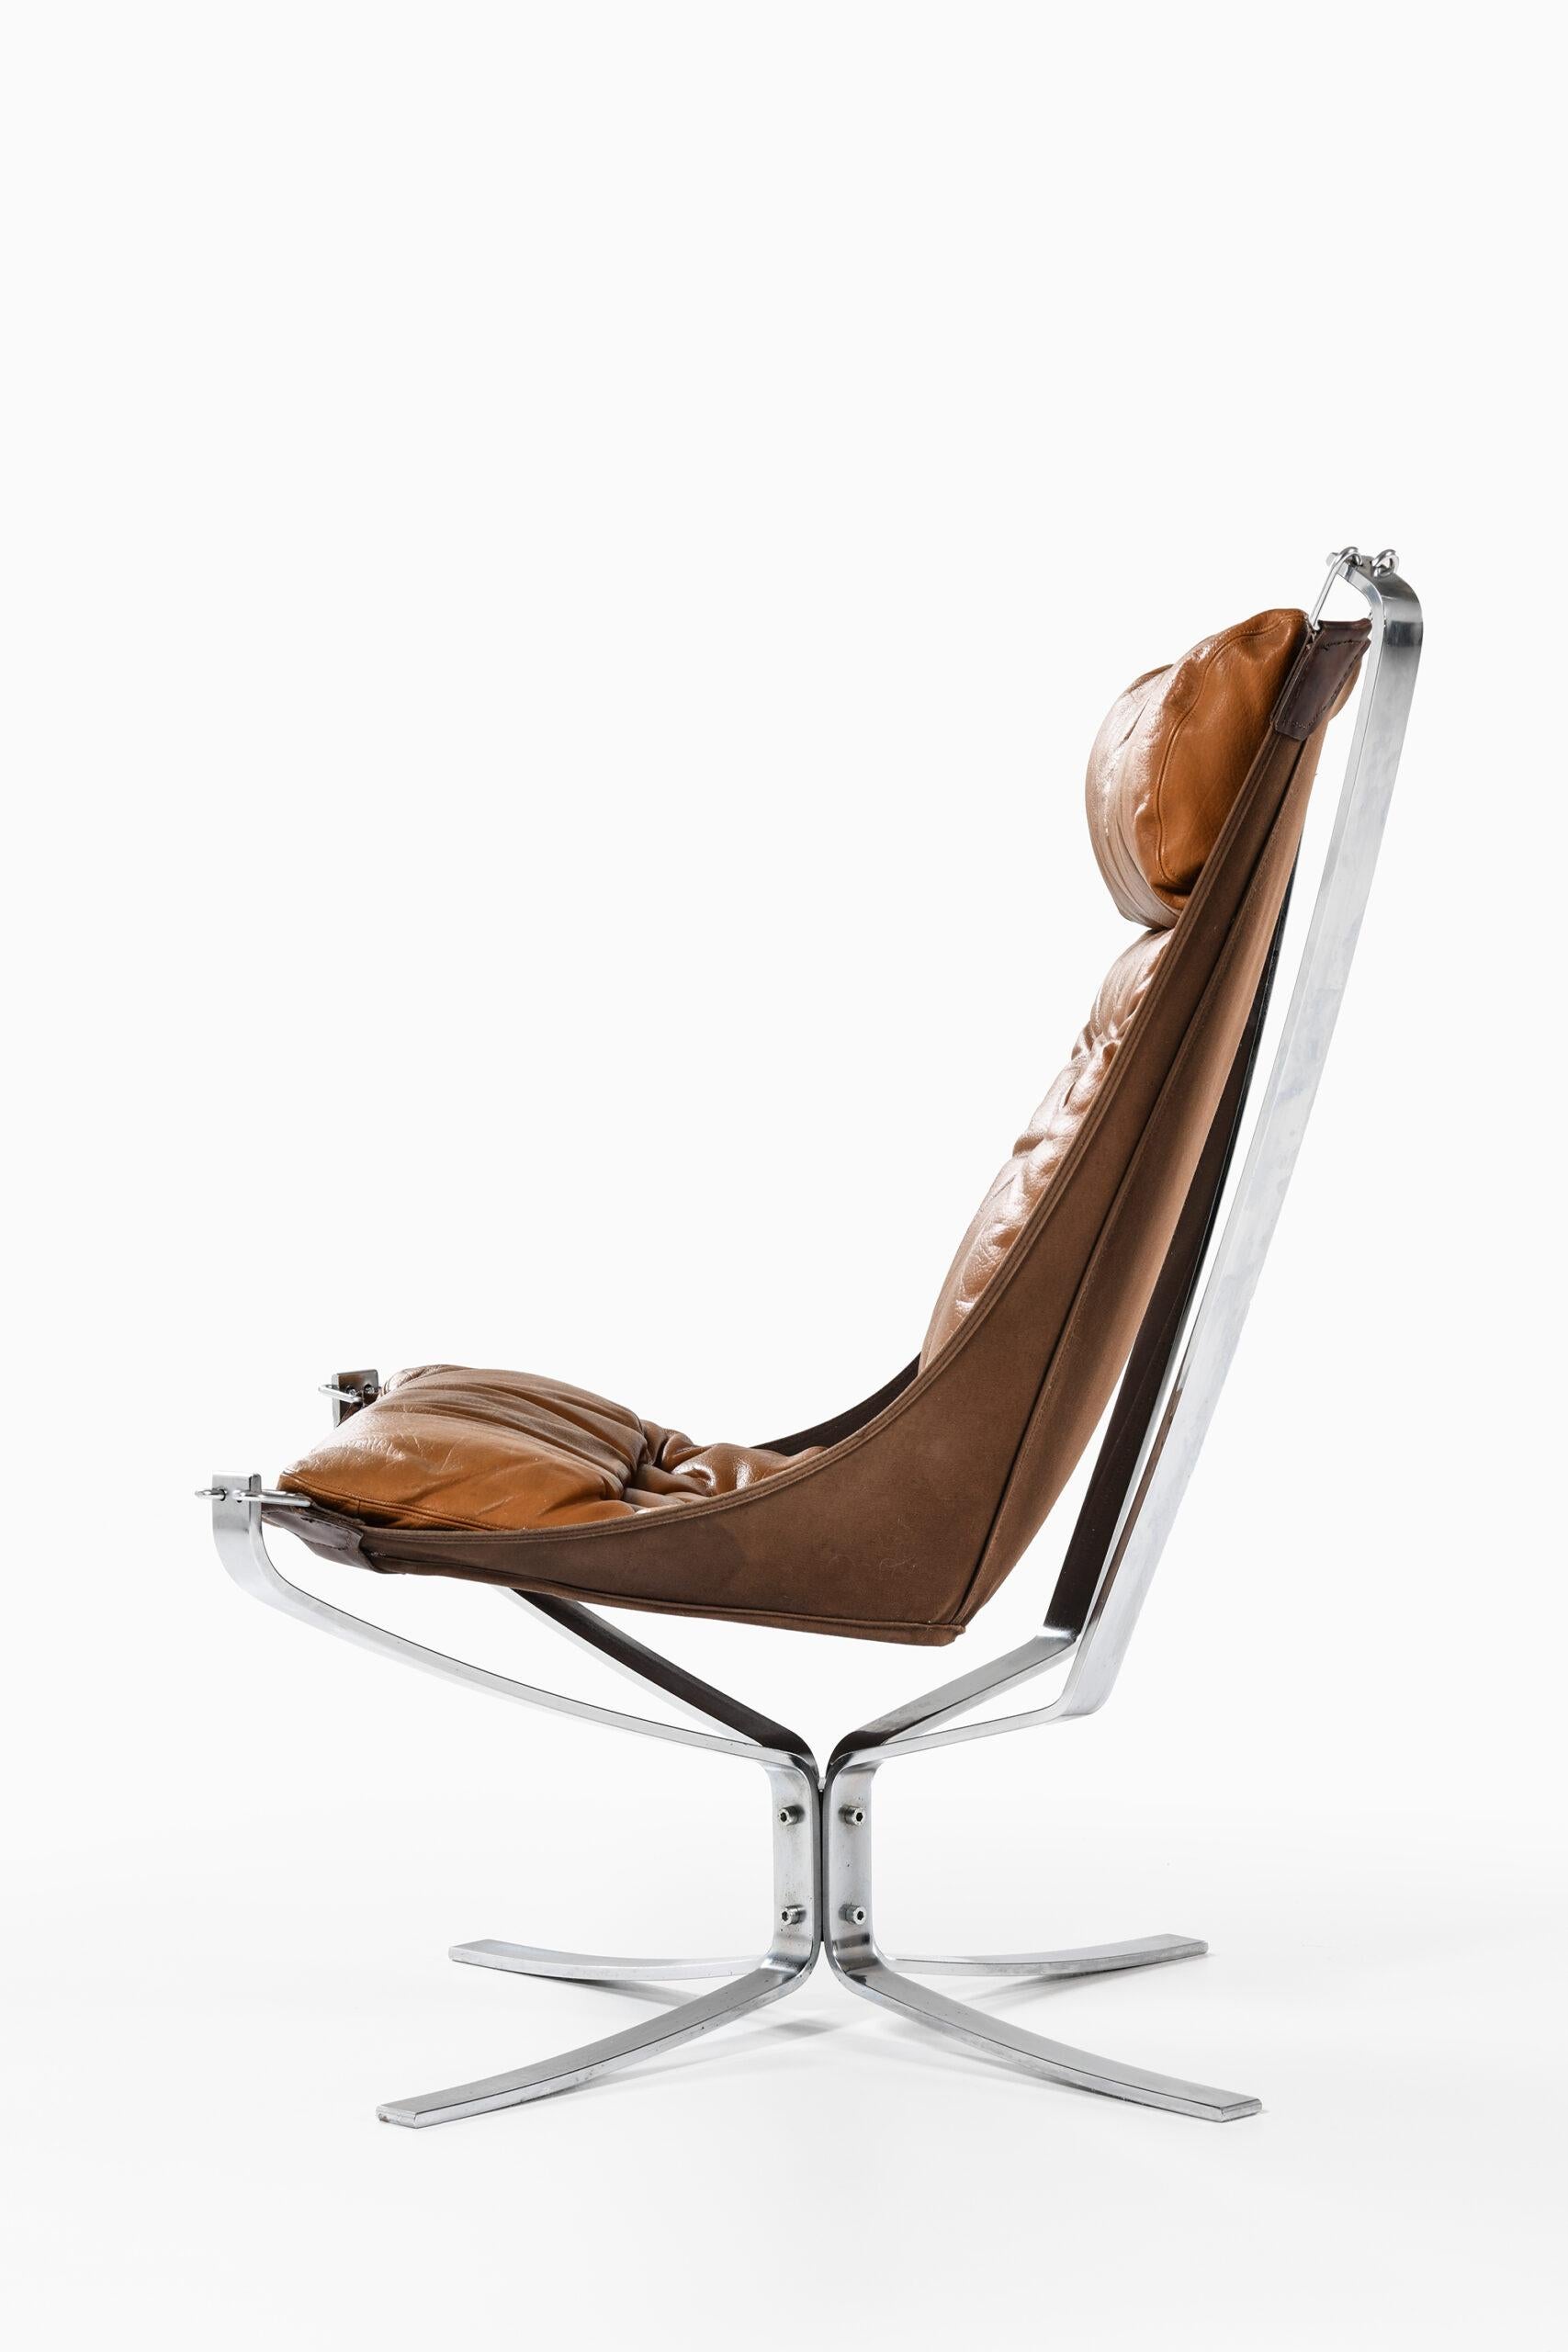 Sigurd Resell Seating Group Model Falcon Produced by Vatne Møbler in Norway For Sale 11